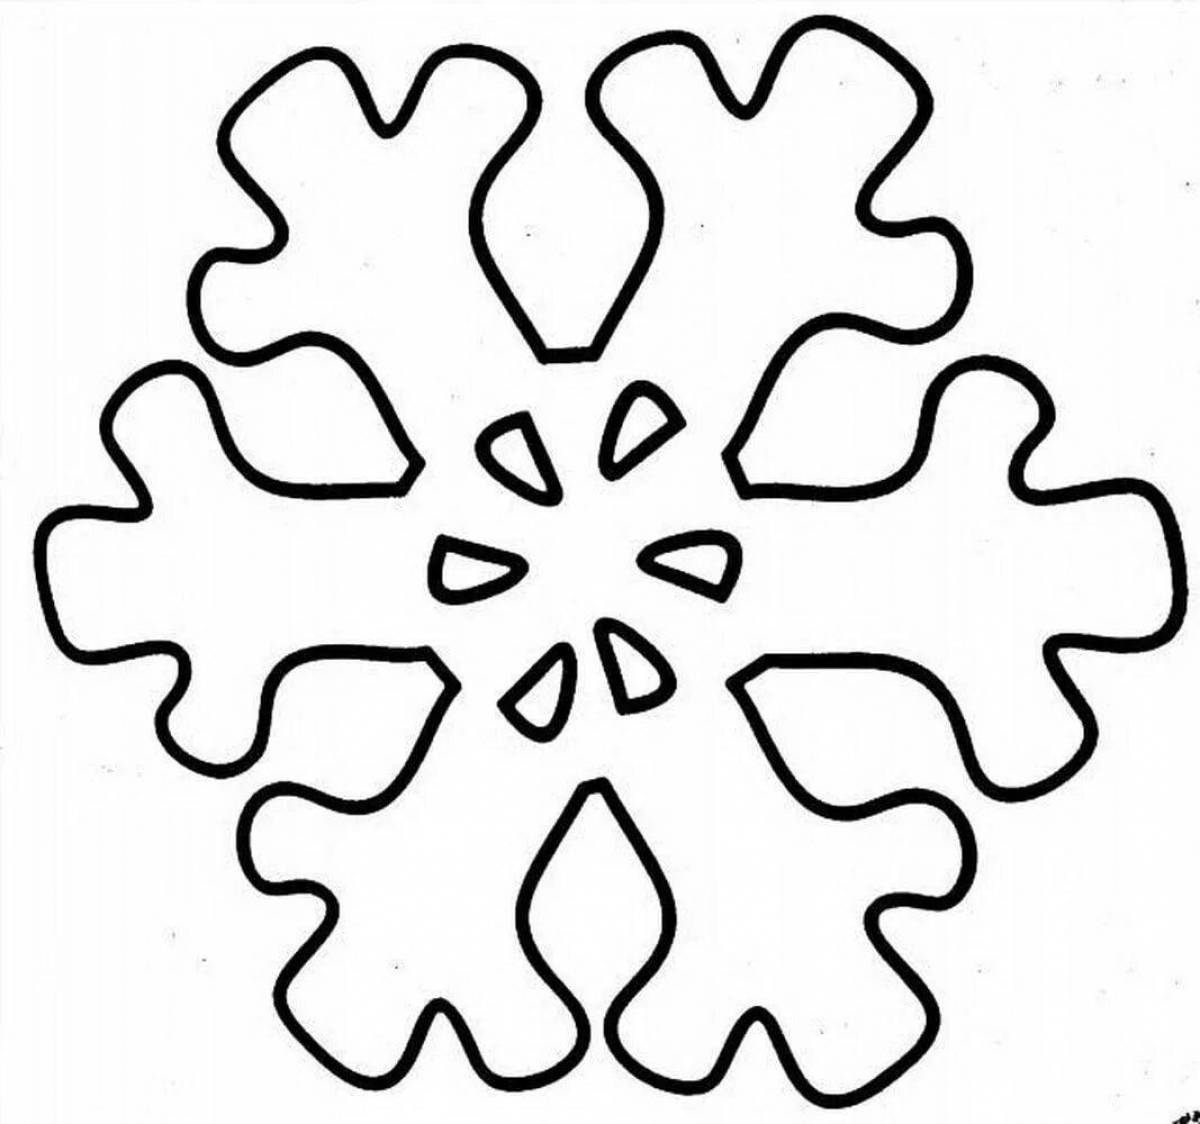 Bright coloring snowflakes for children 4-5 years old in kindergarten